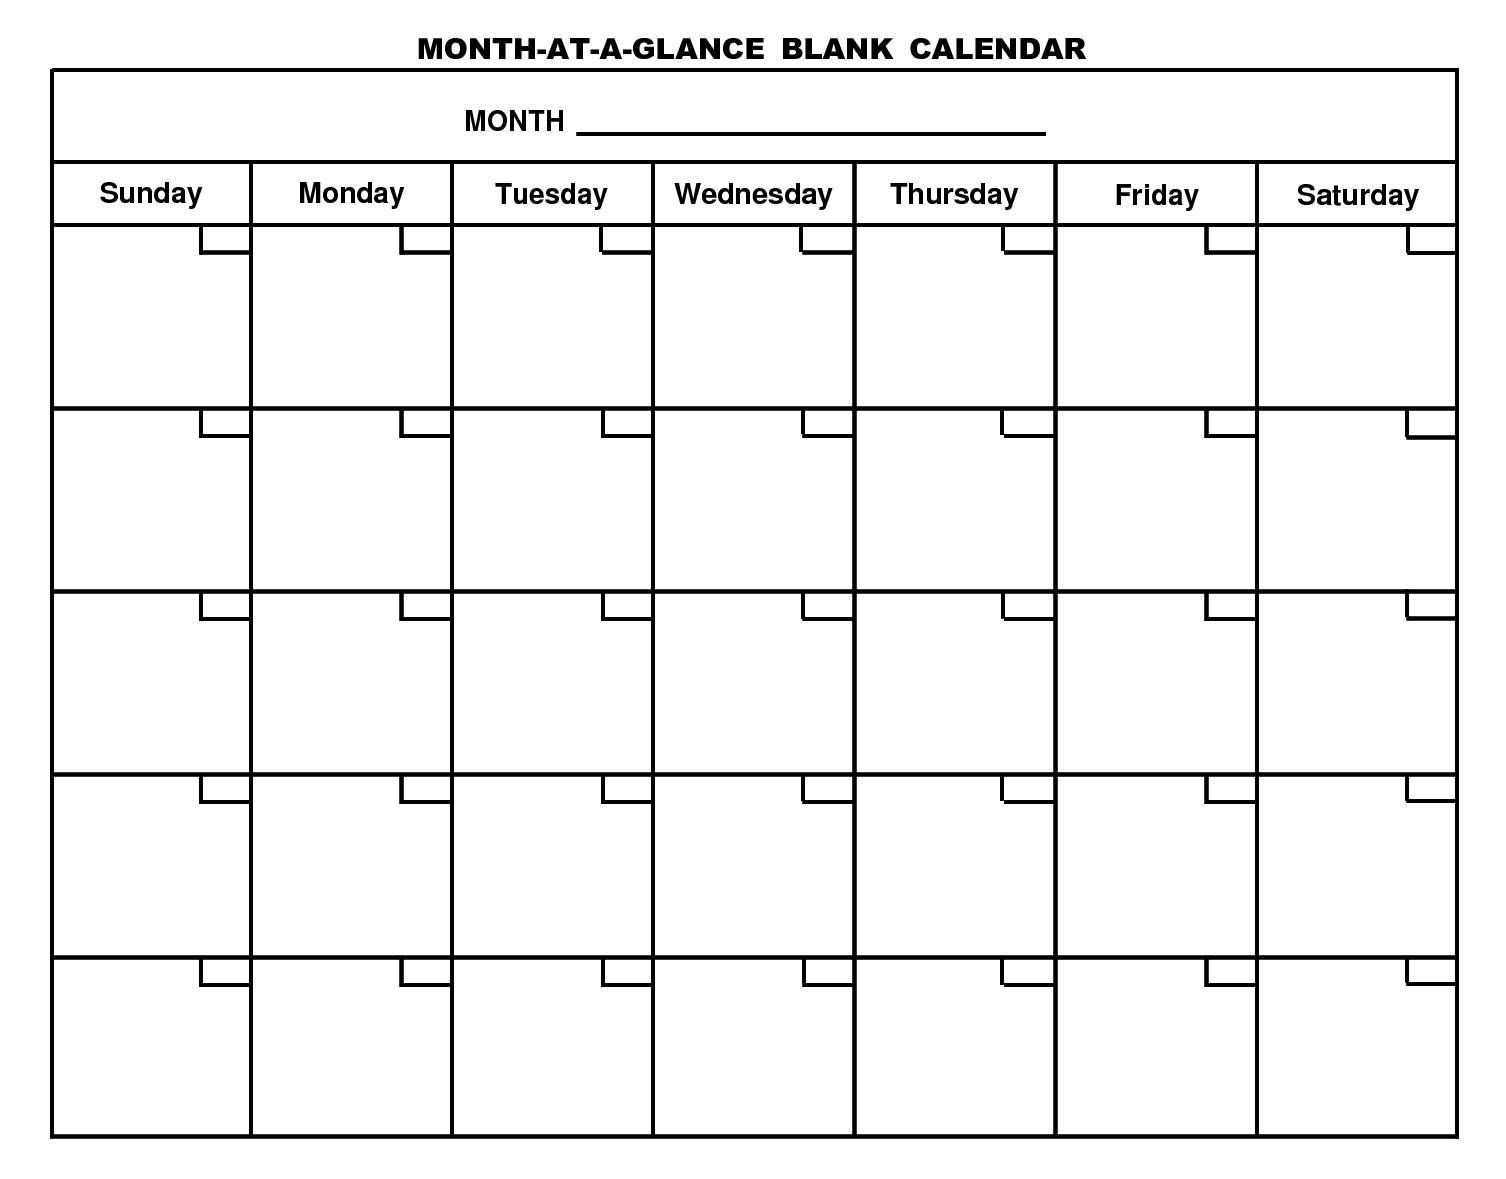 Month At A Glance Blank Calendar | Monthly Printable Calender With Month At A Glance Blank Calendar Template